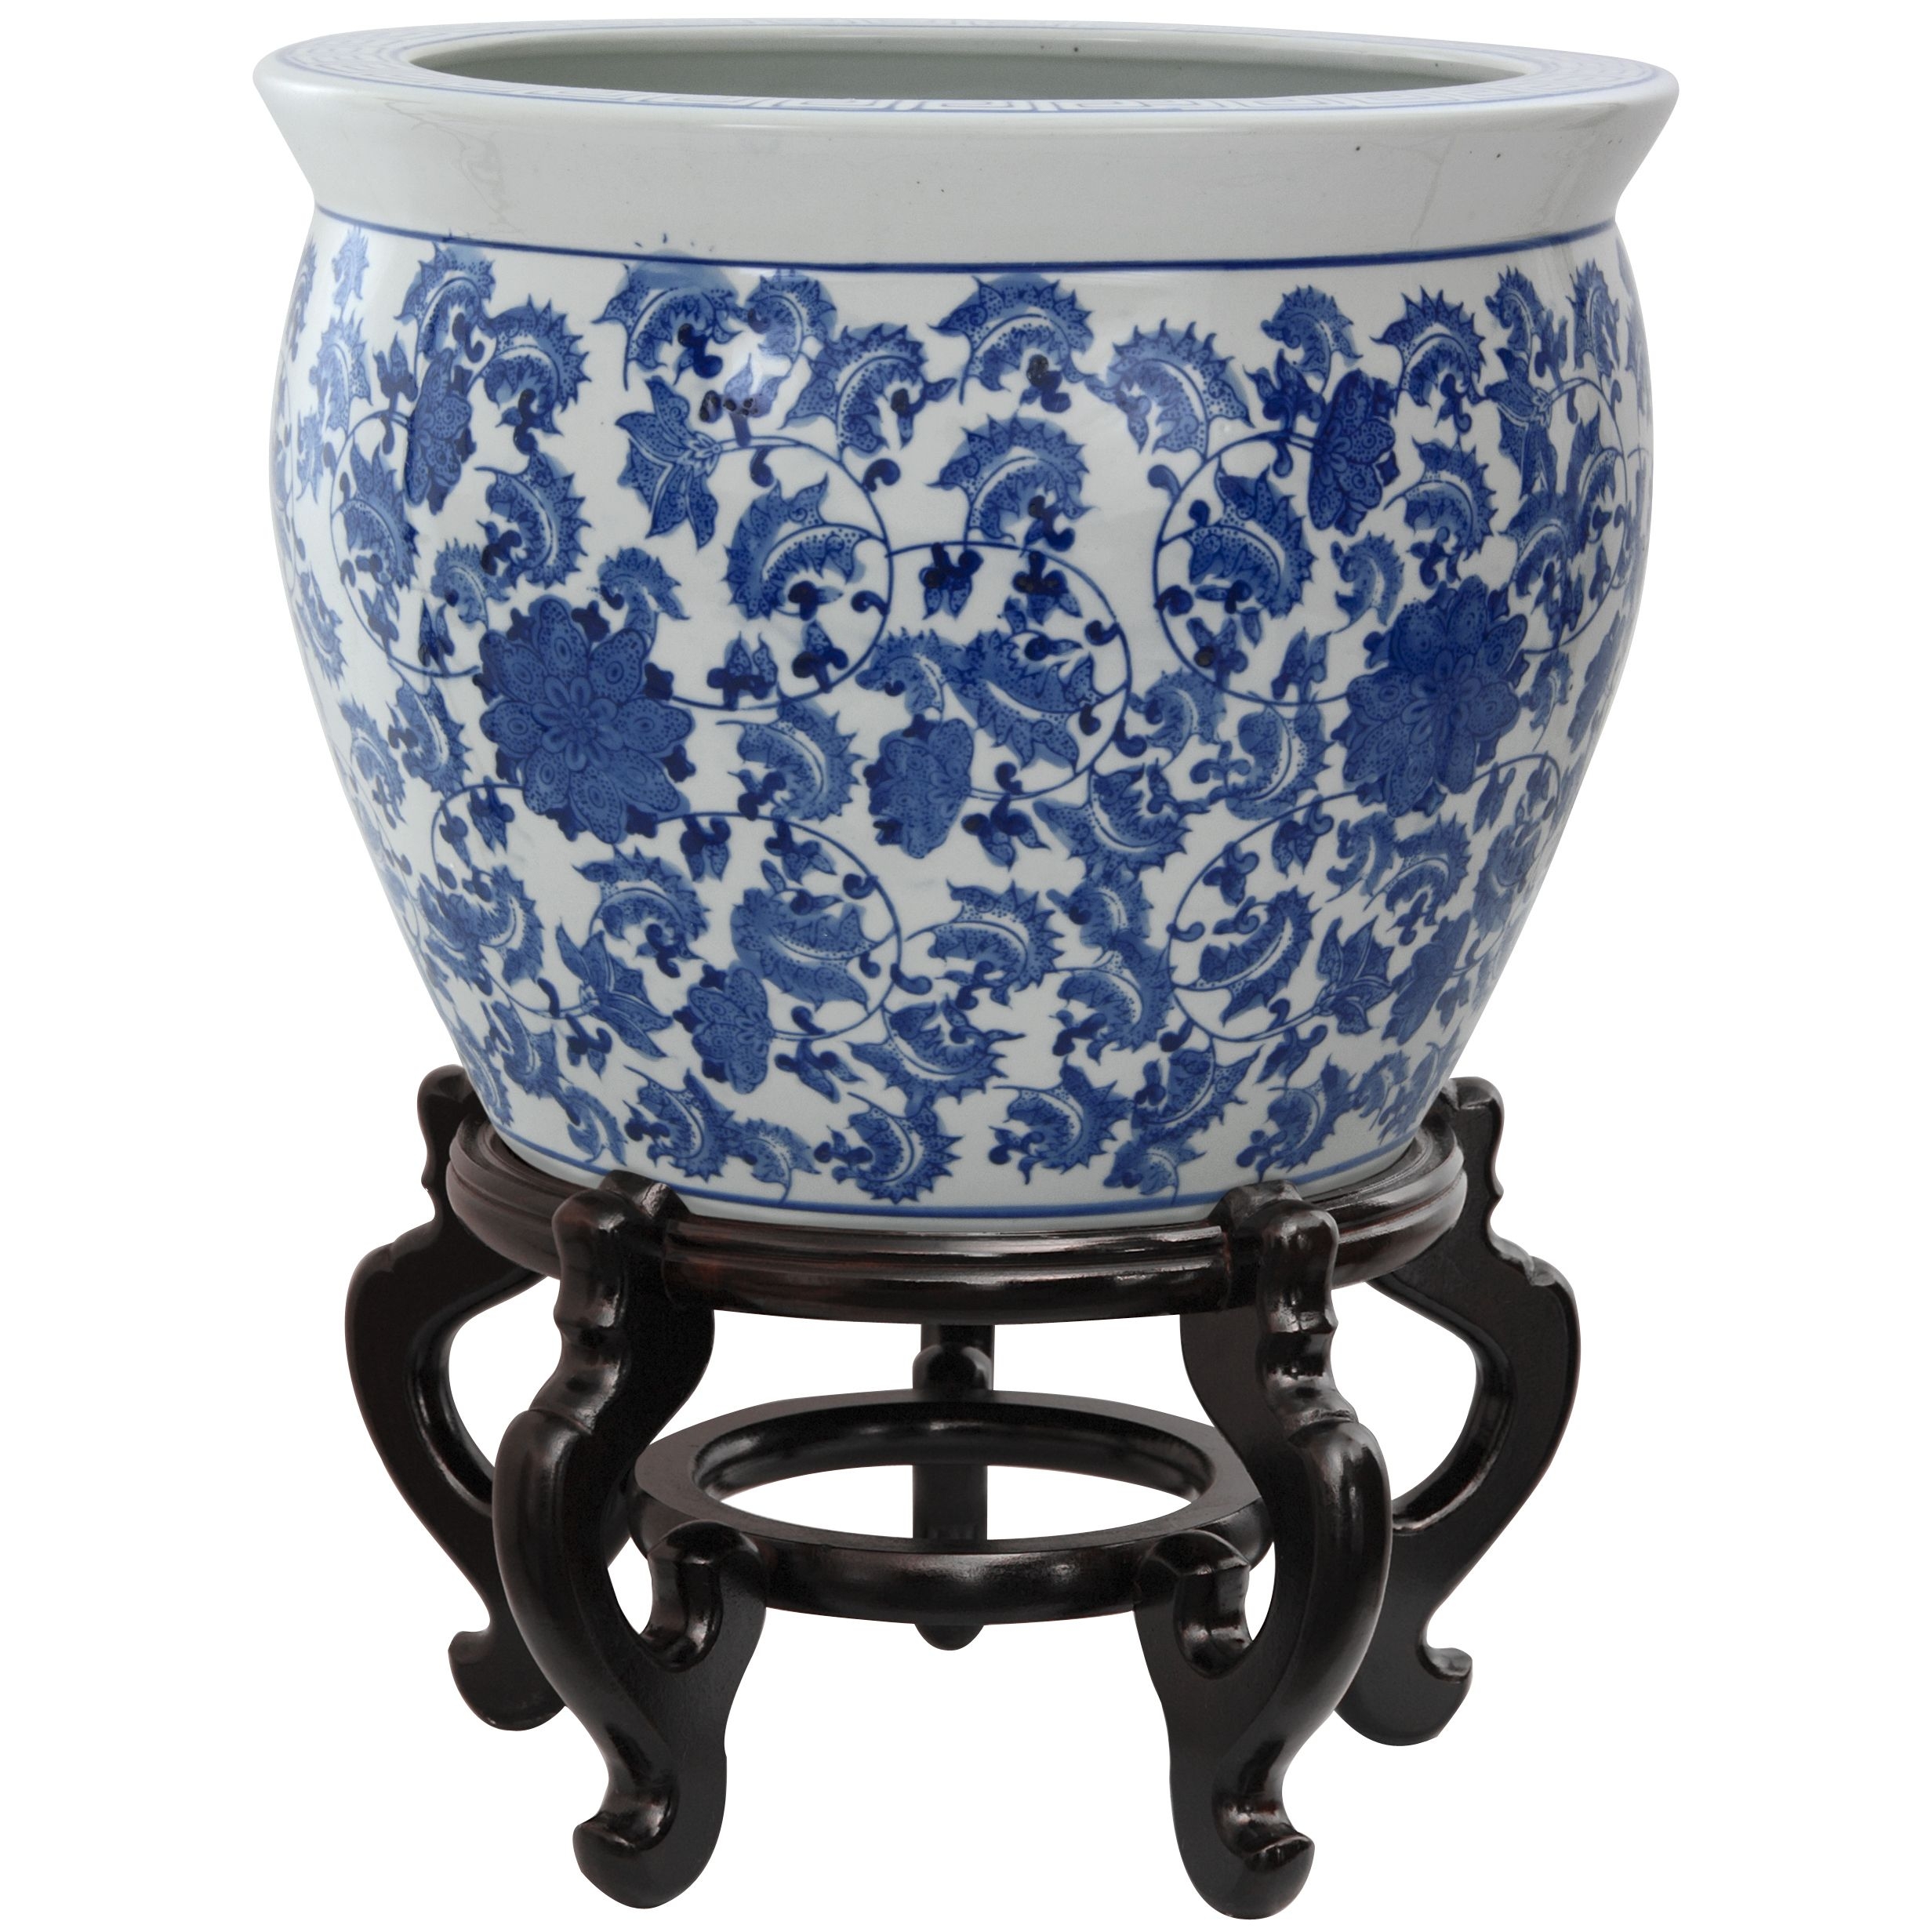 Oriental Furniture Classic Original Authentic, 14-Inch Fine Export Chinese Porcelain Fishbowl, Ming Blue and White Floral Design